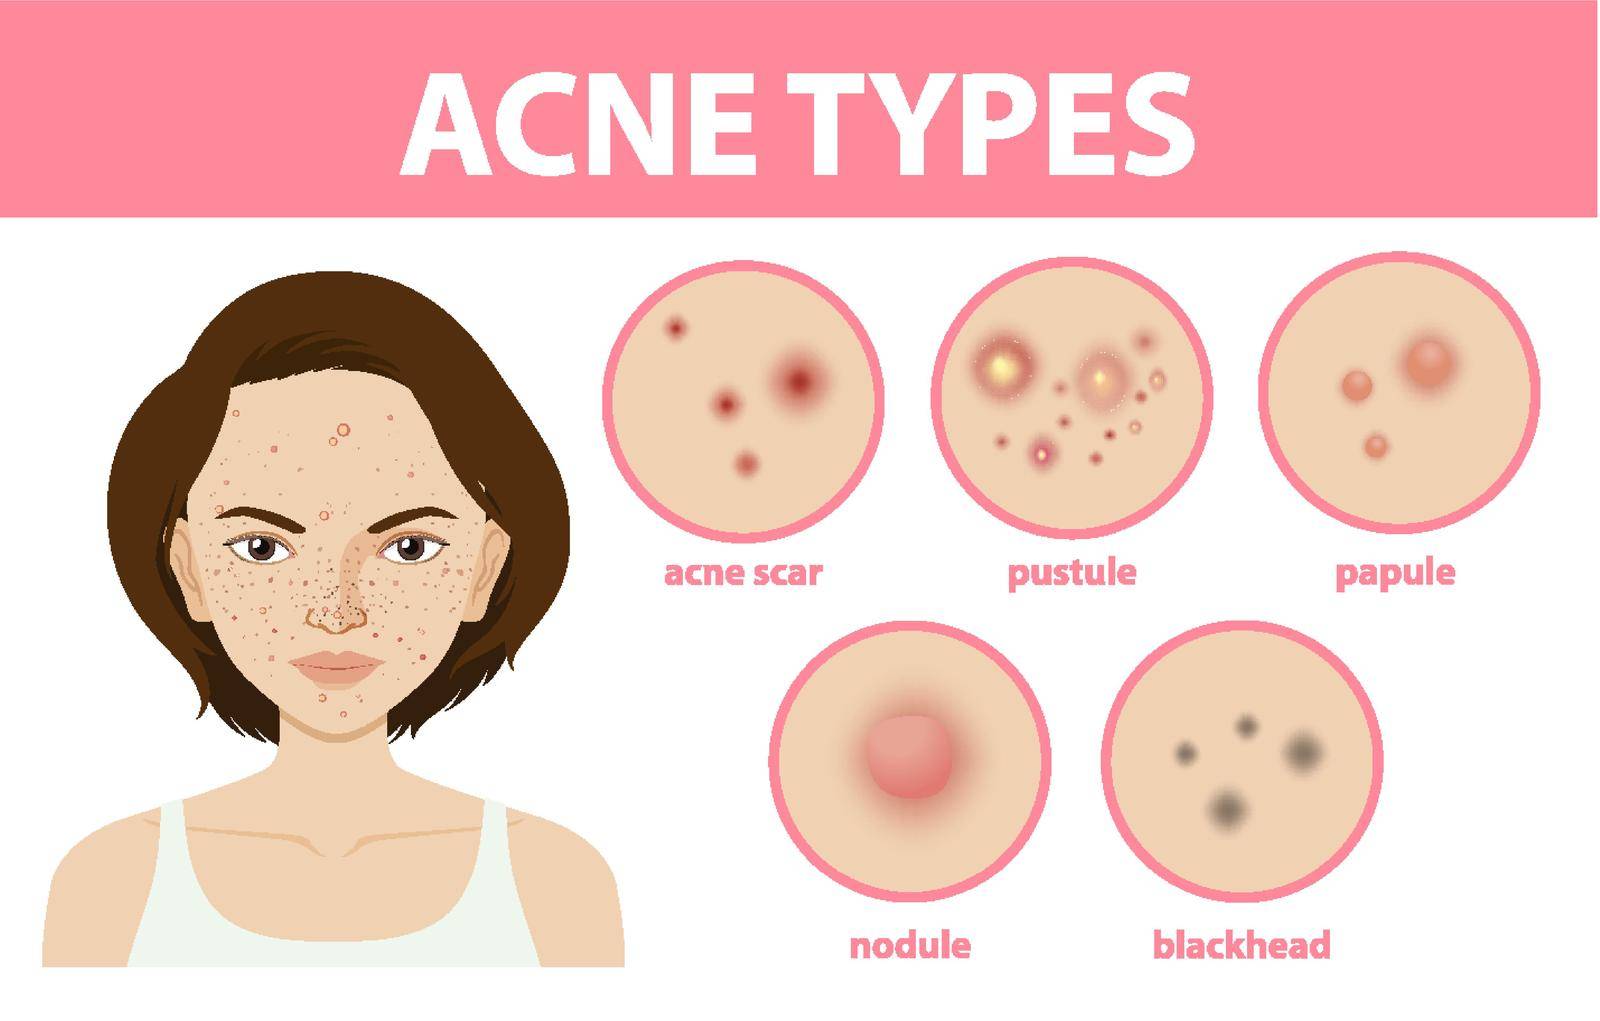 Types of acne on the skin or pimples illustration